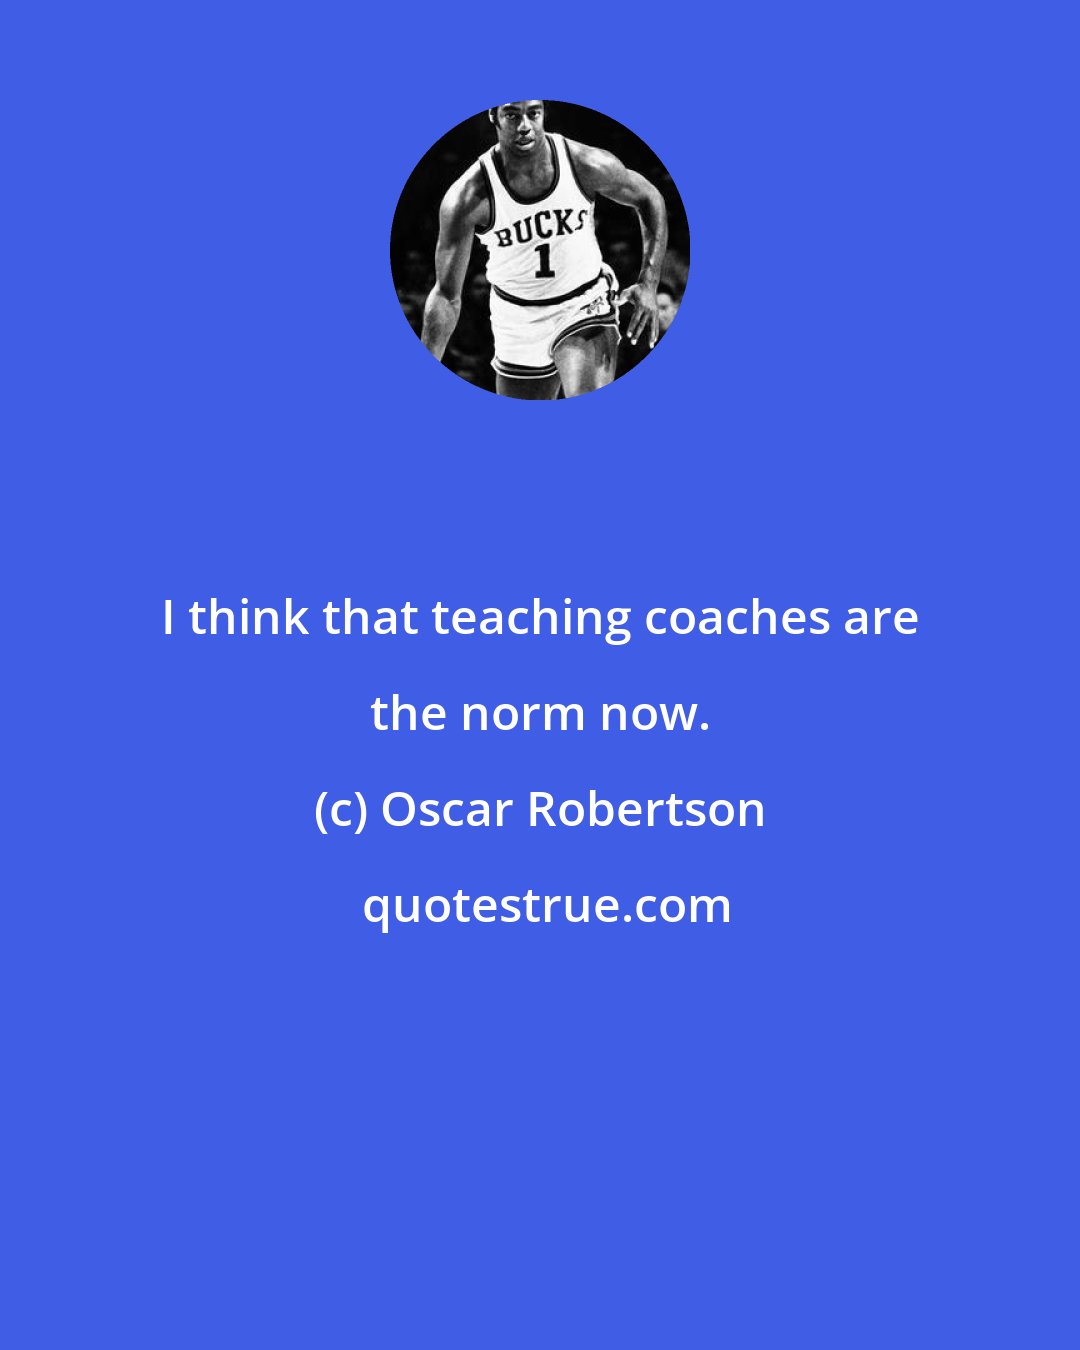 Oscar Robertson: I think that teaching coaches are the norm now.